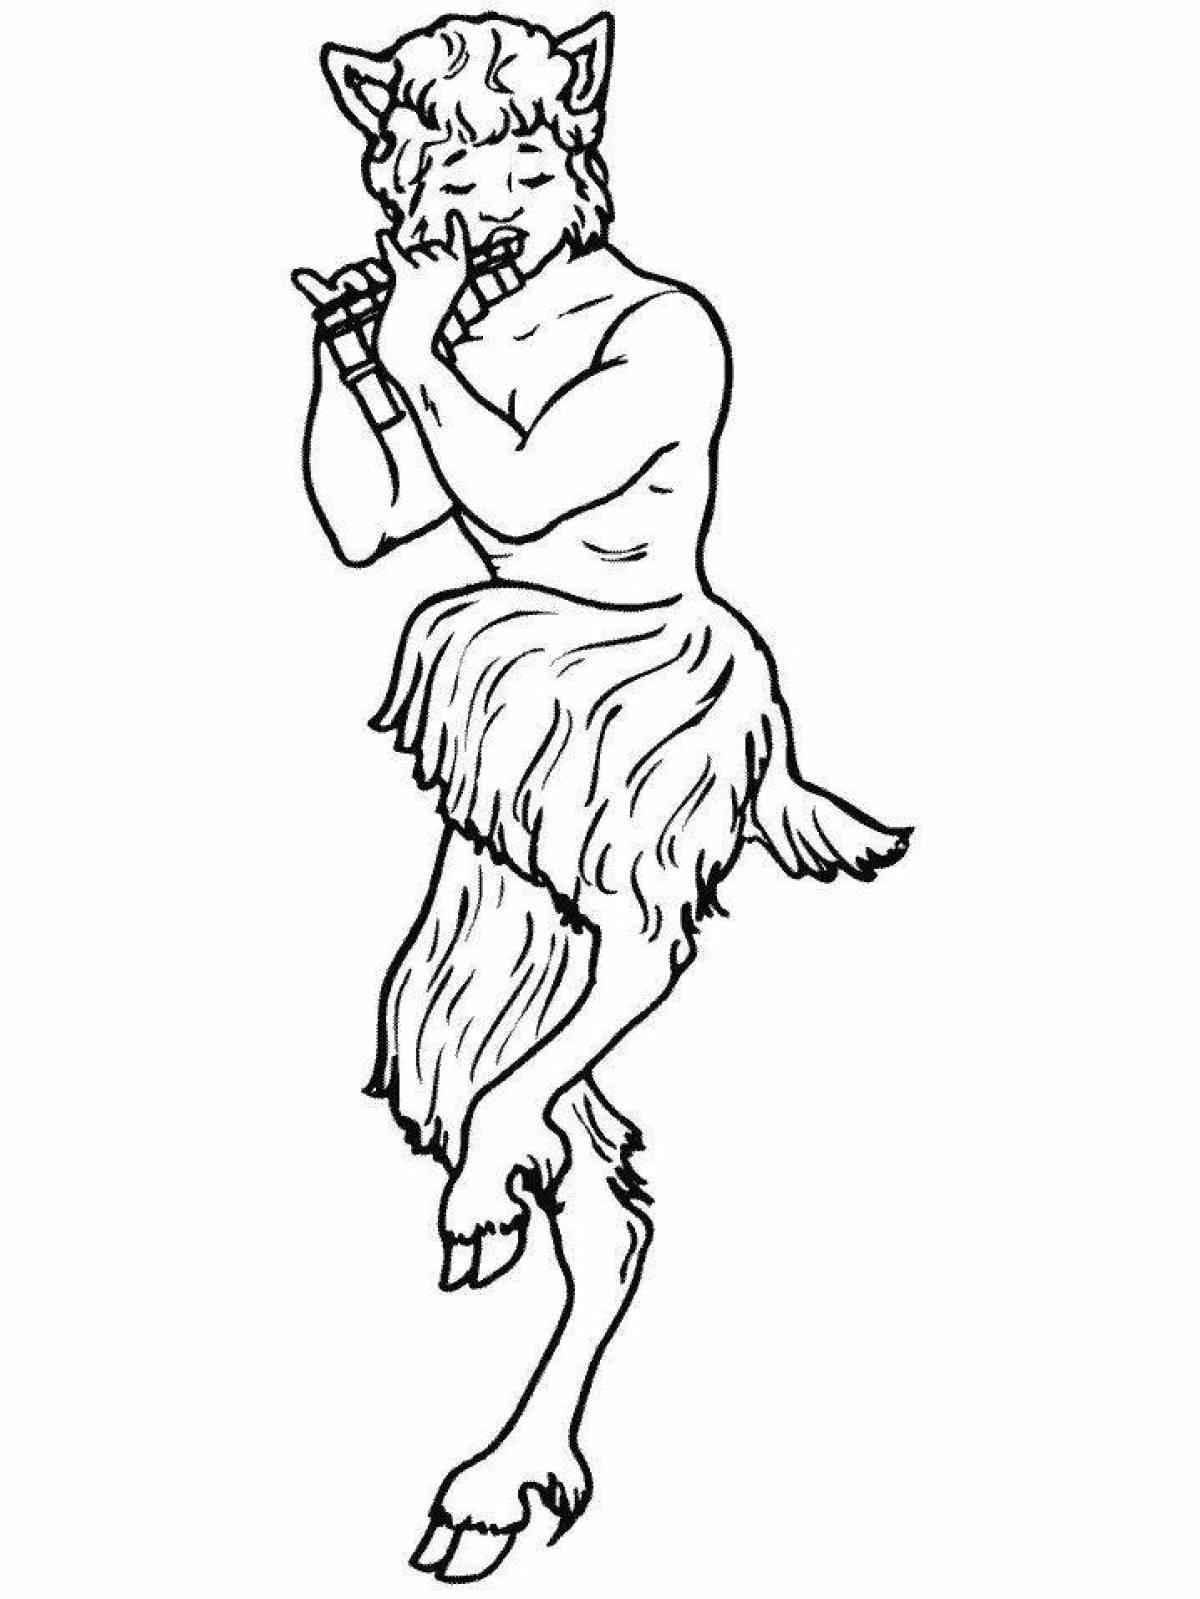 Great coloring book of ancient Greek myths